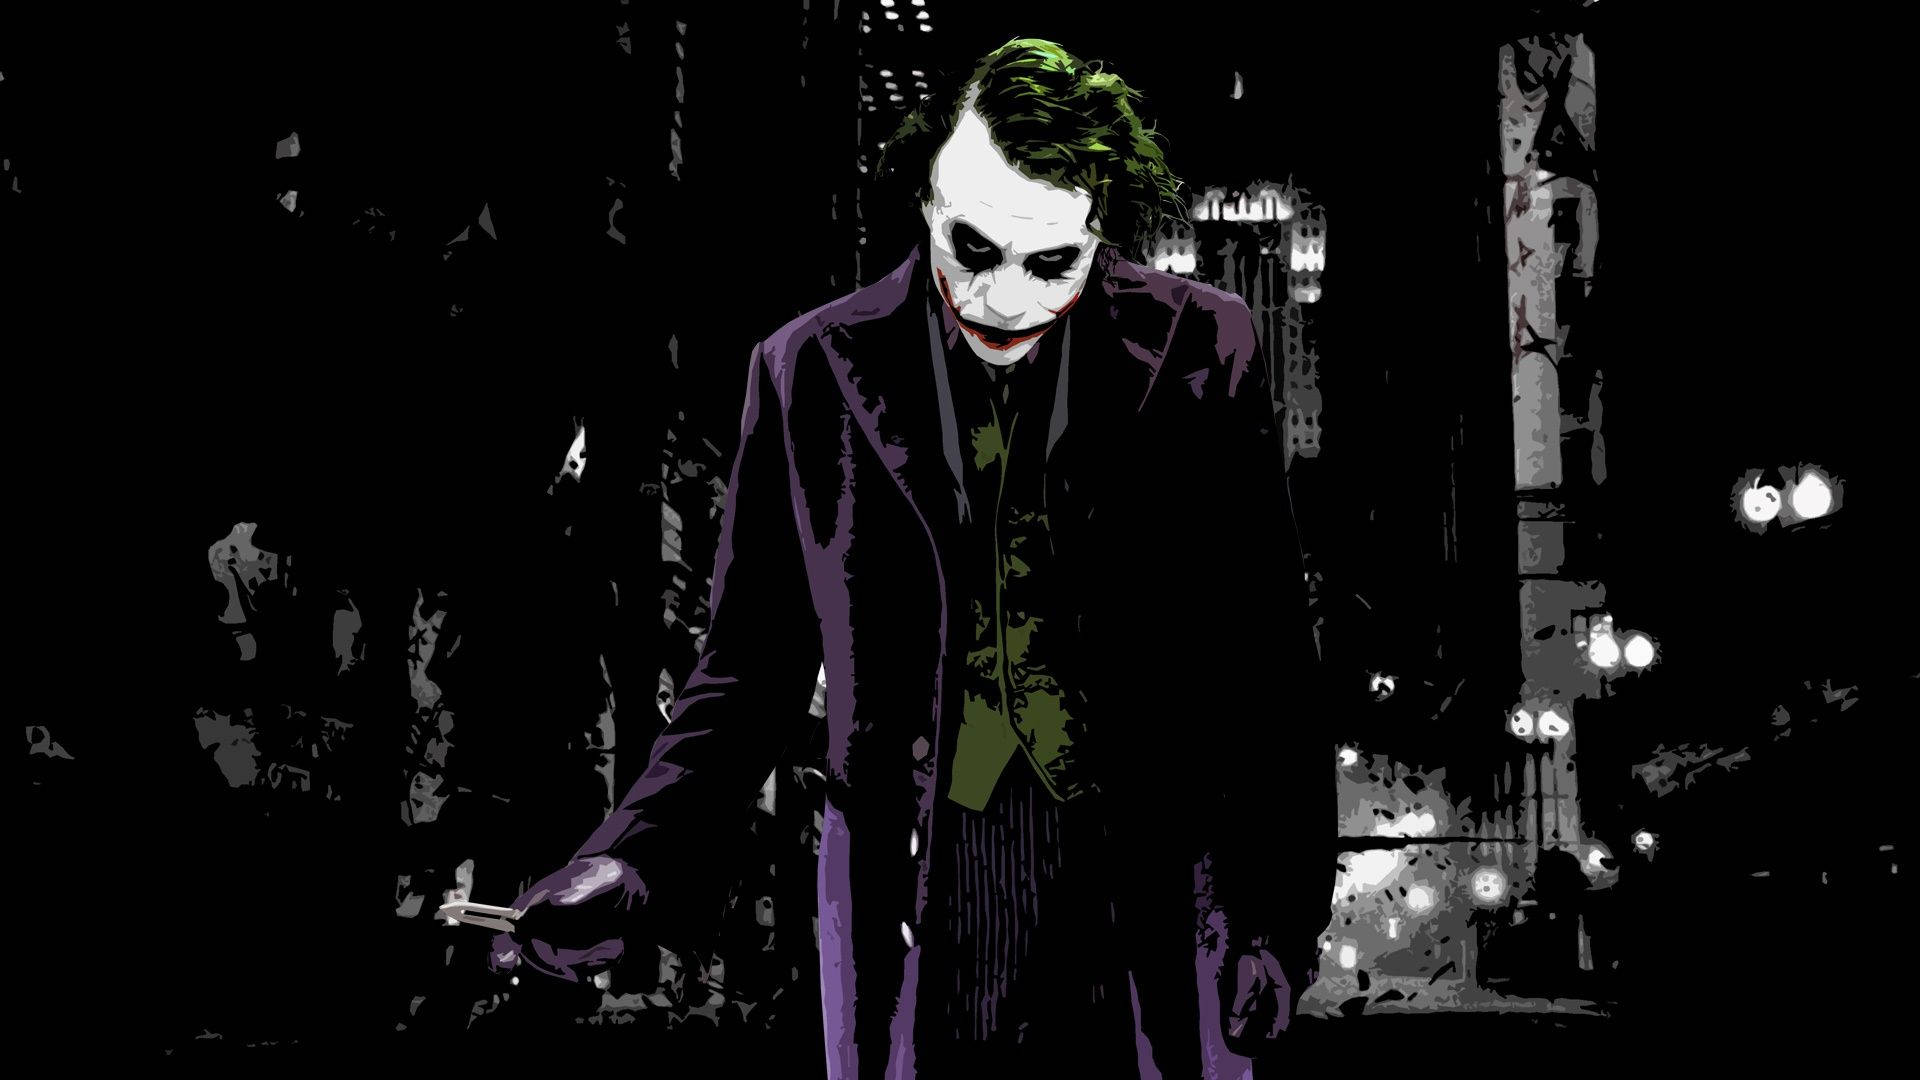 Awesome The Joker Art Background